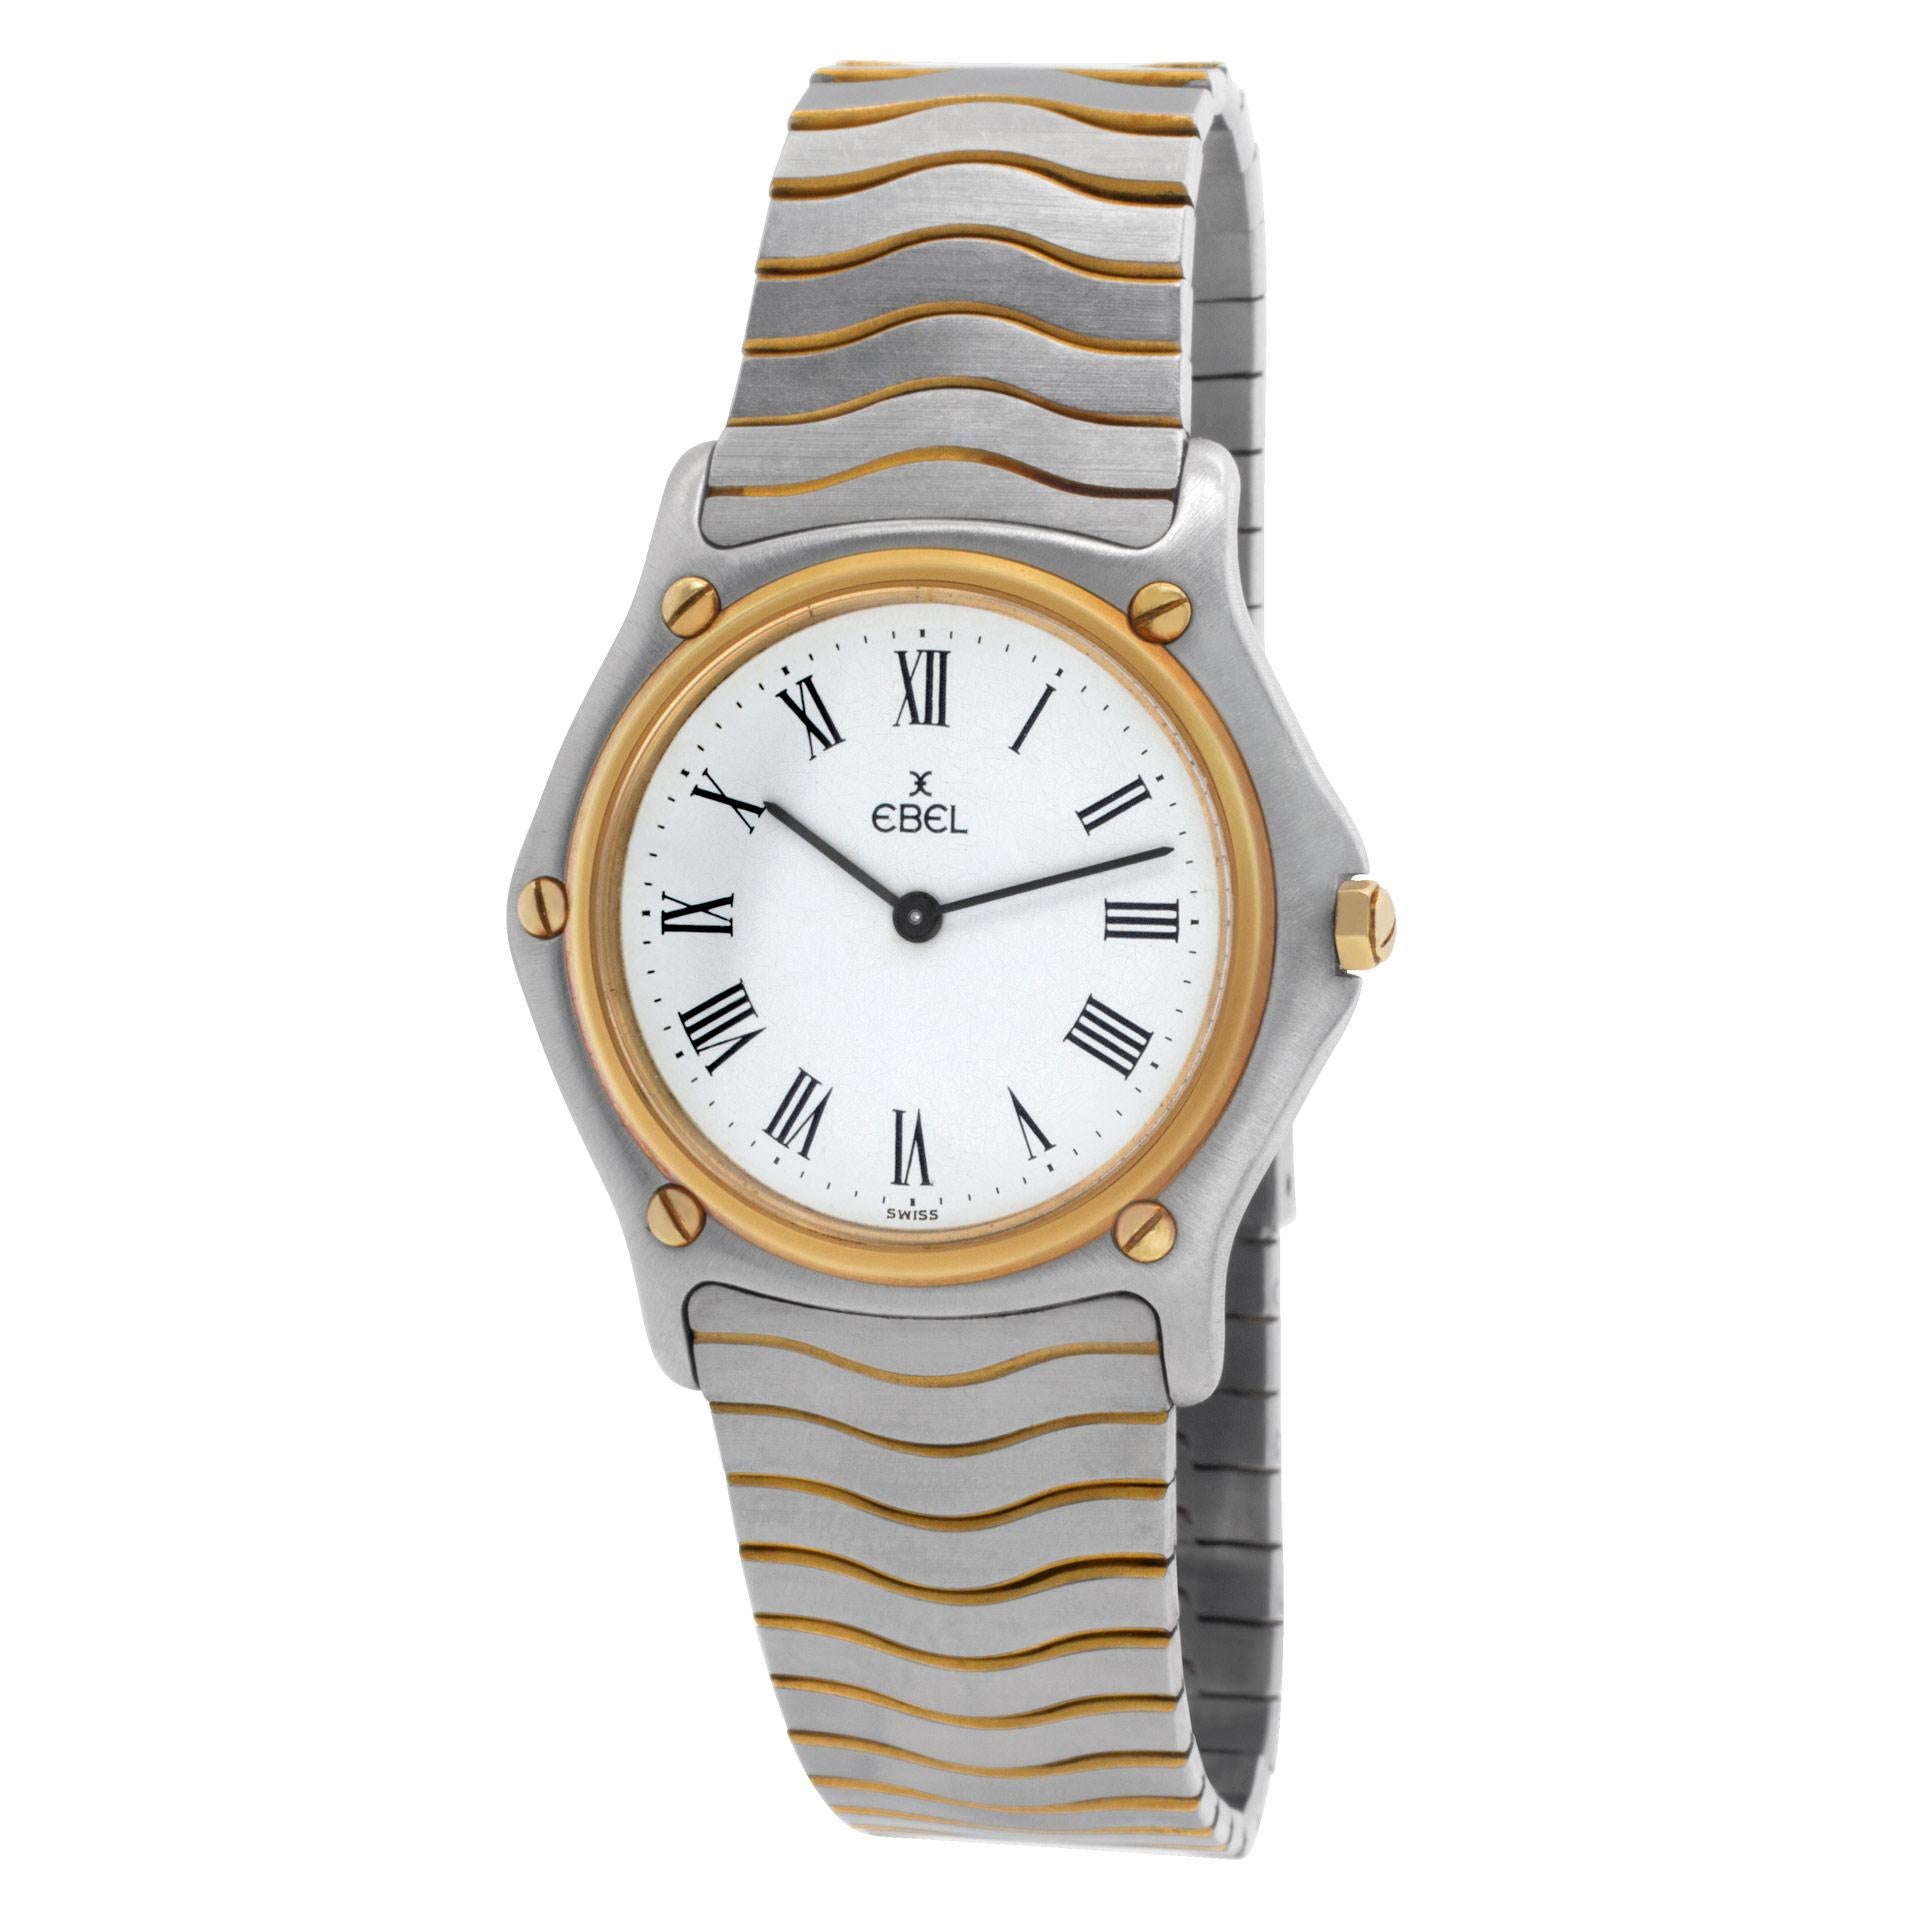 Ladies Ebel Classic Wave in 18k & stainless steel. Quartz. Ref 12976. Circa 1990s. Wrist size 6 inches. Fine Pre-owned Ebel Watch. Certified preowned Classic Ebel Classic Wave 12976 watch is made out of Gold and steel on a 18k & Stainless Steel